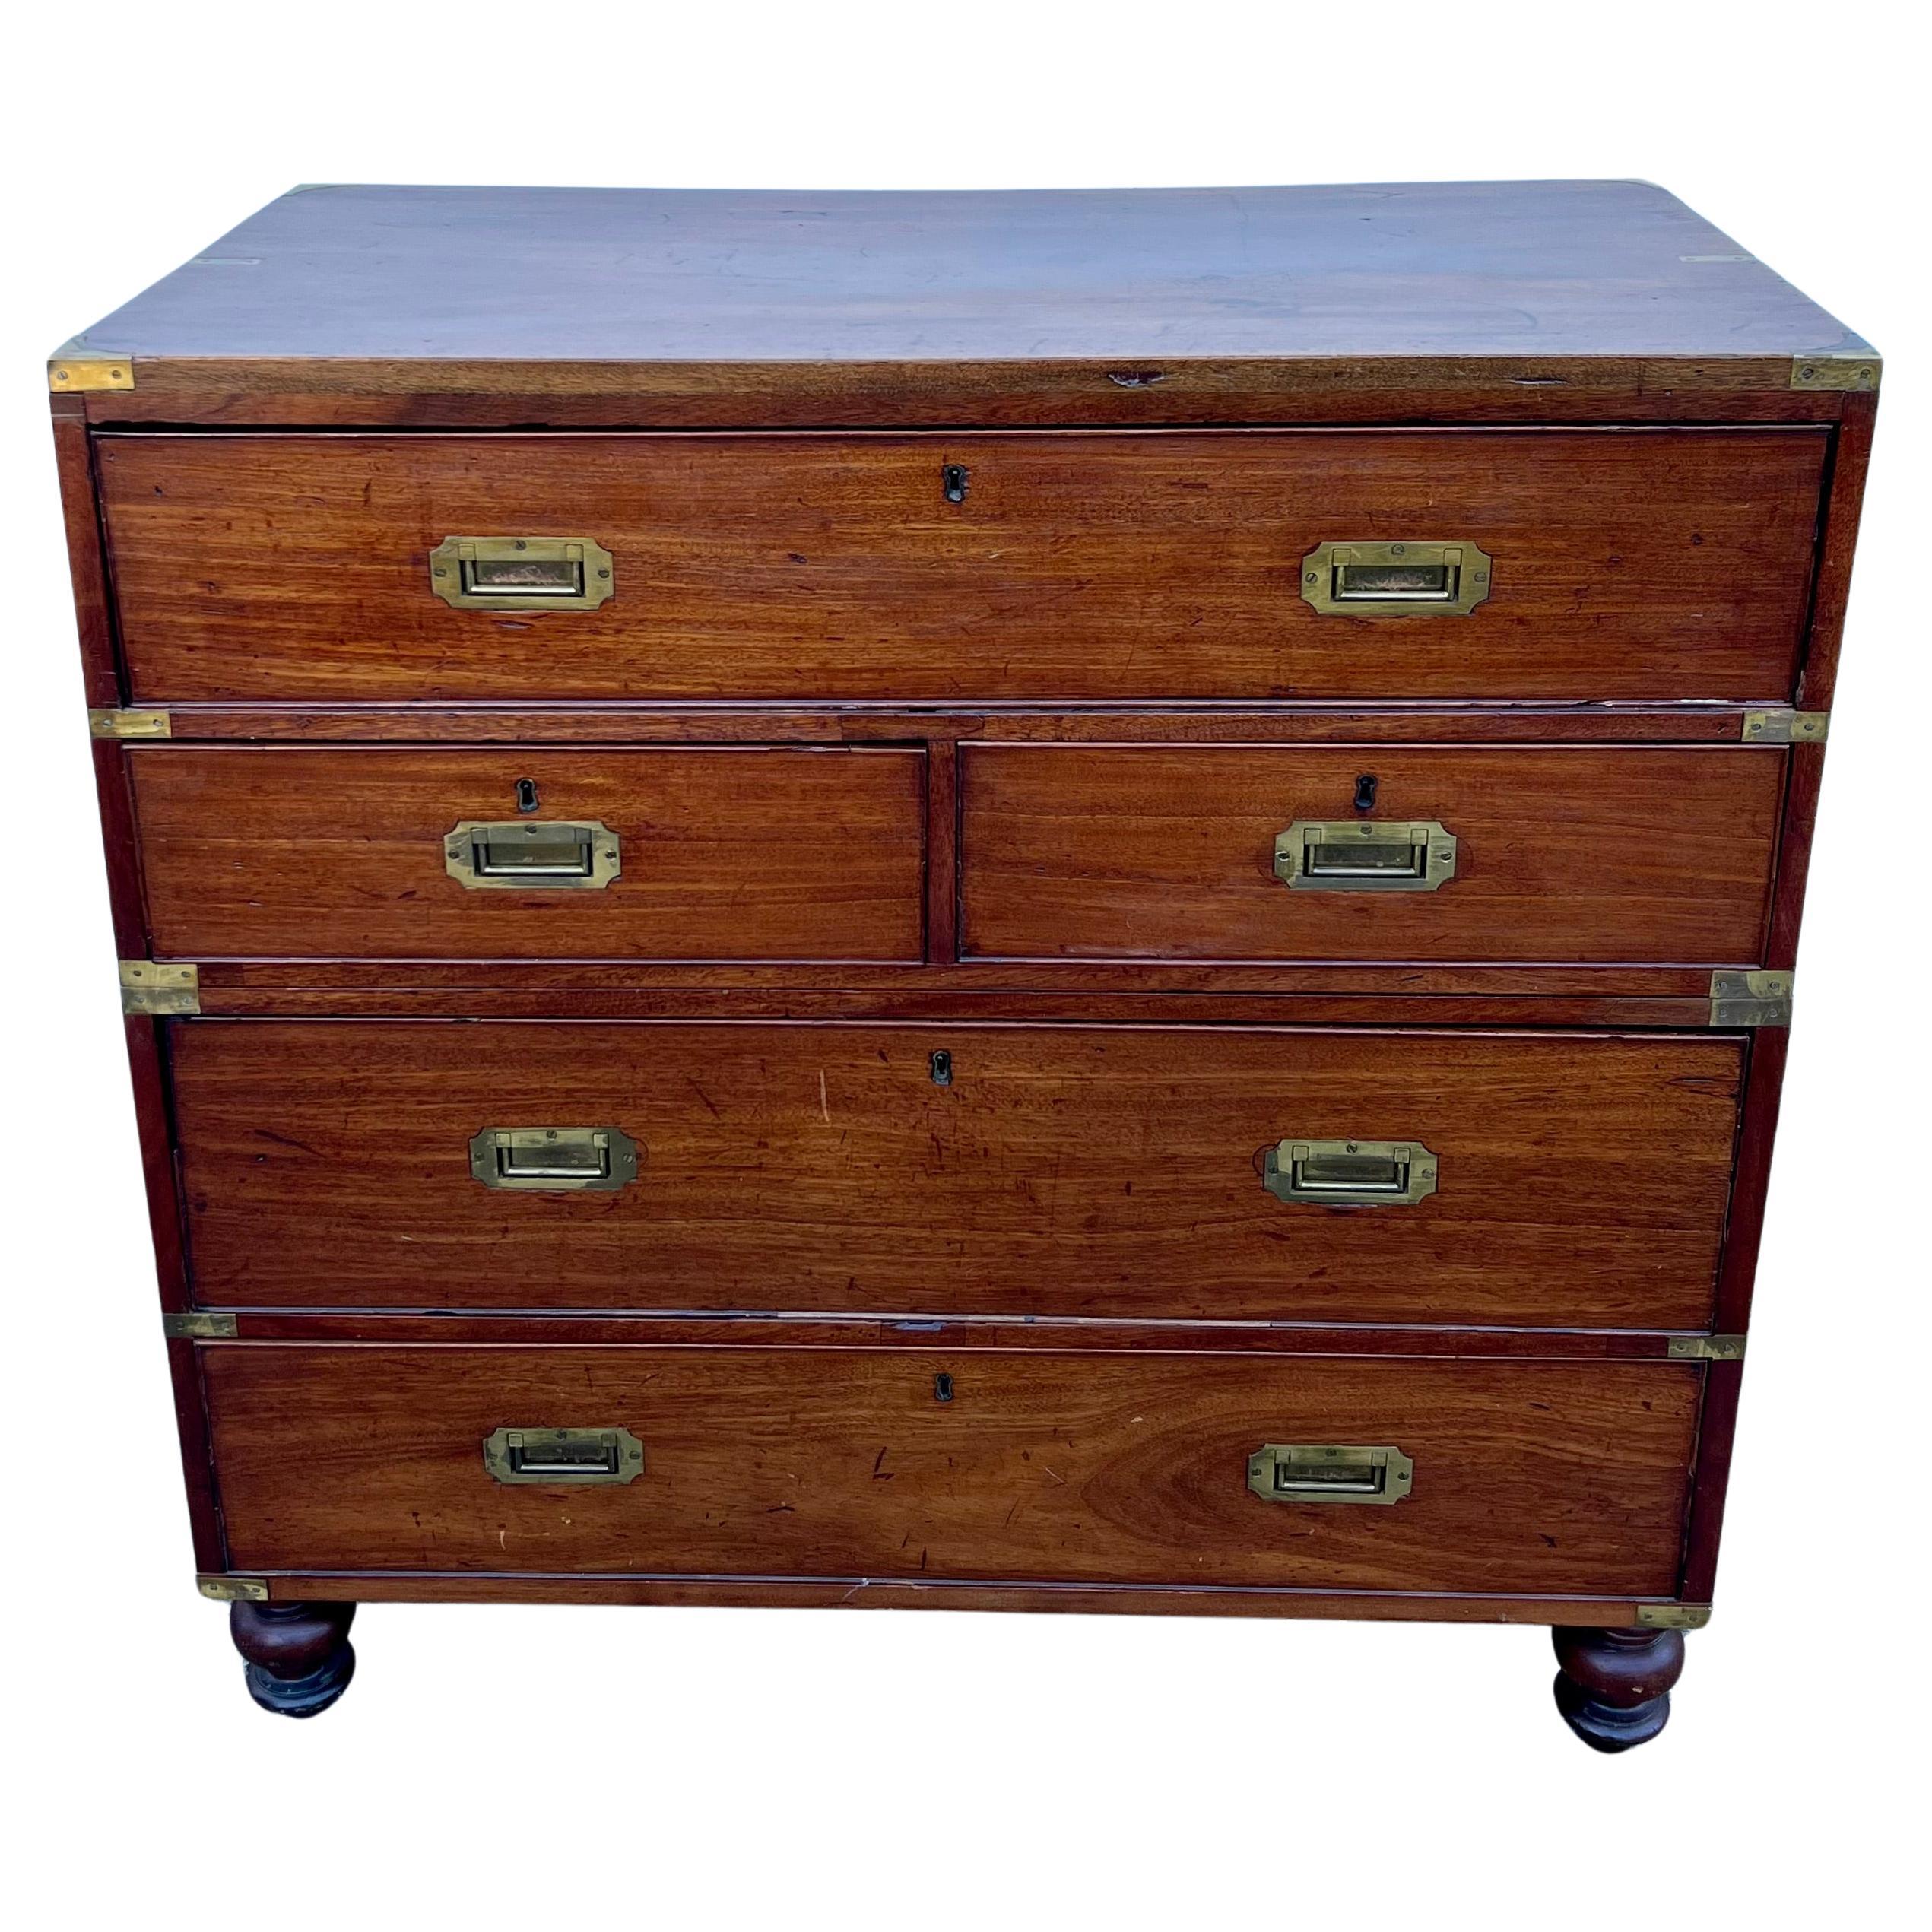 19th Century English Mahogany Campaign Desk and Chest of Drawers For Sale